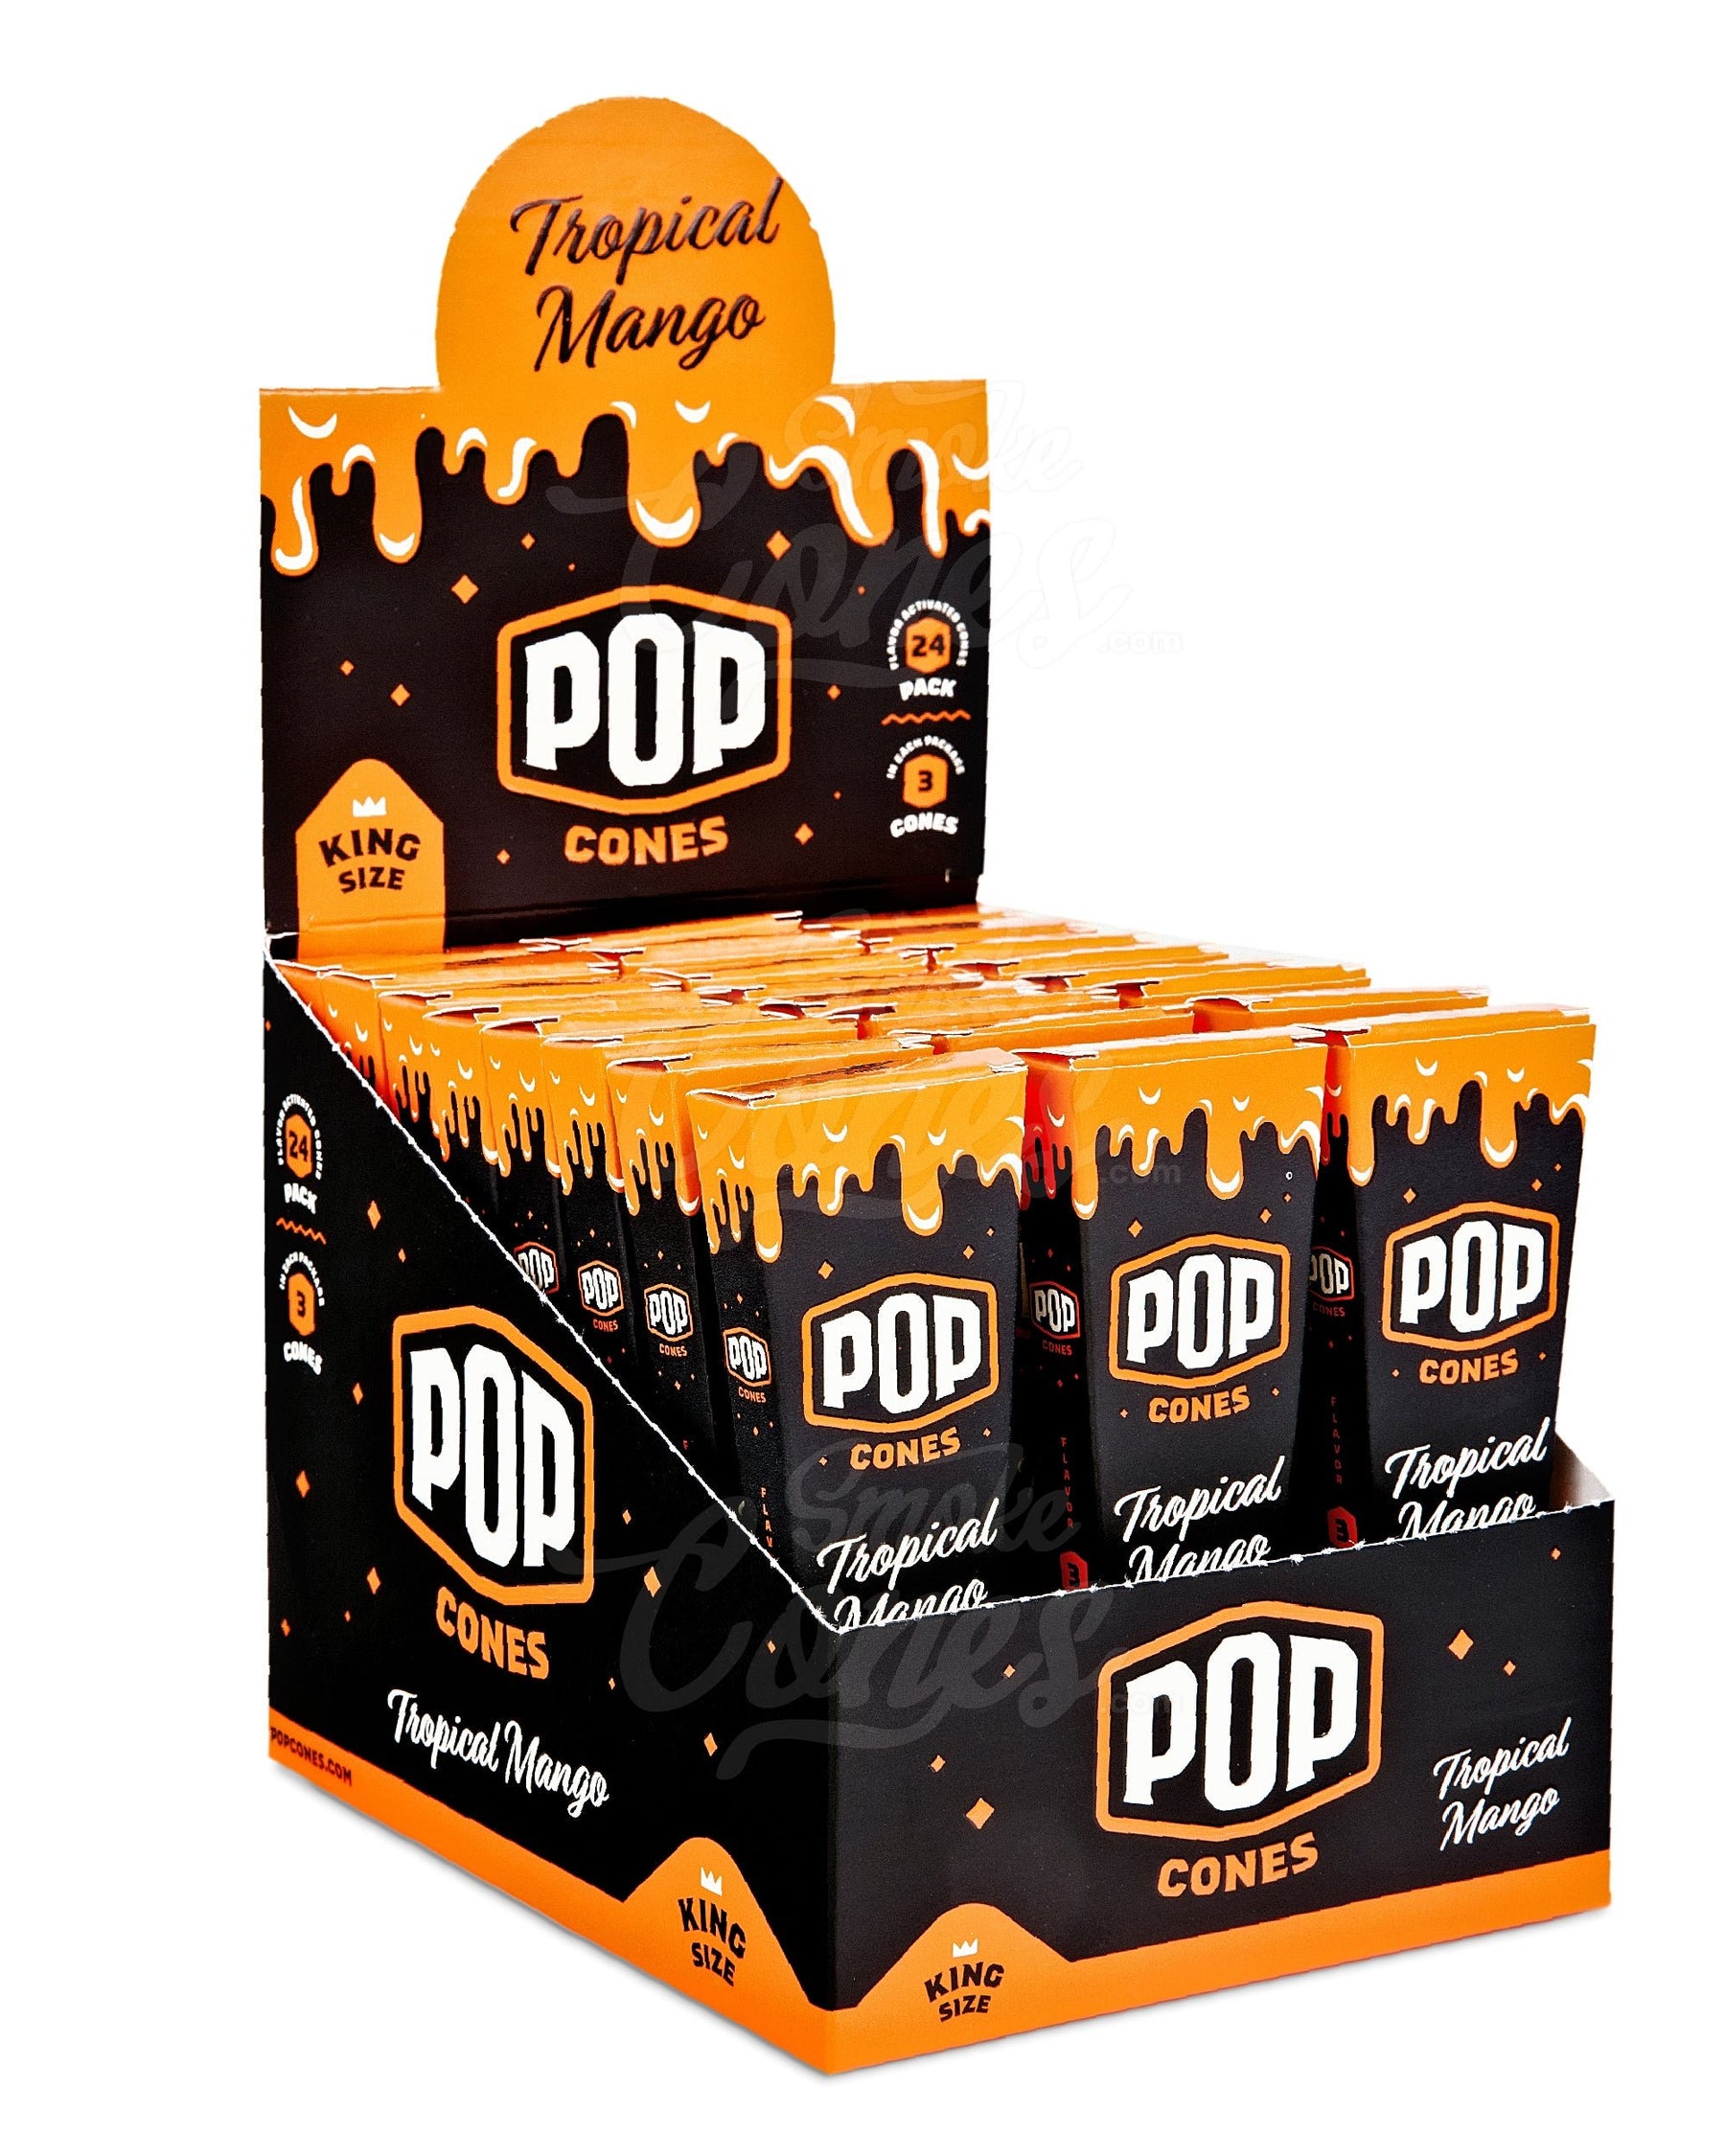 Pop Cones Tropical Mango 109mm King Sized Pre Rolled Cones 24/Box - 1